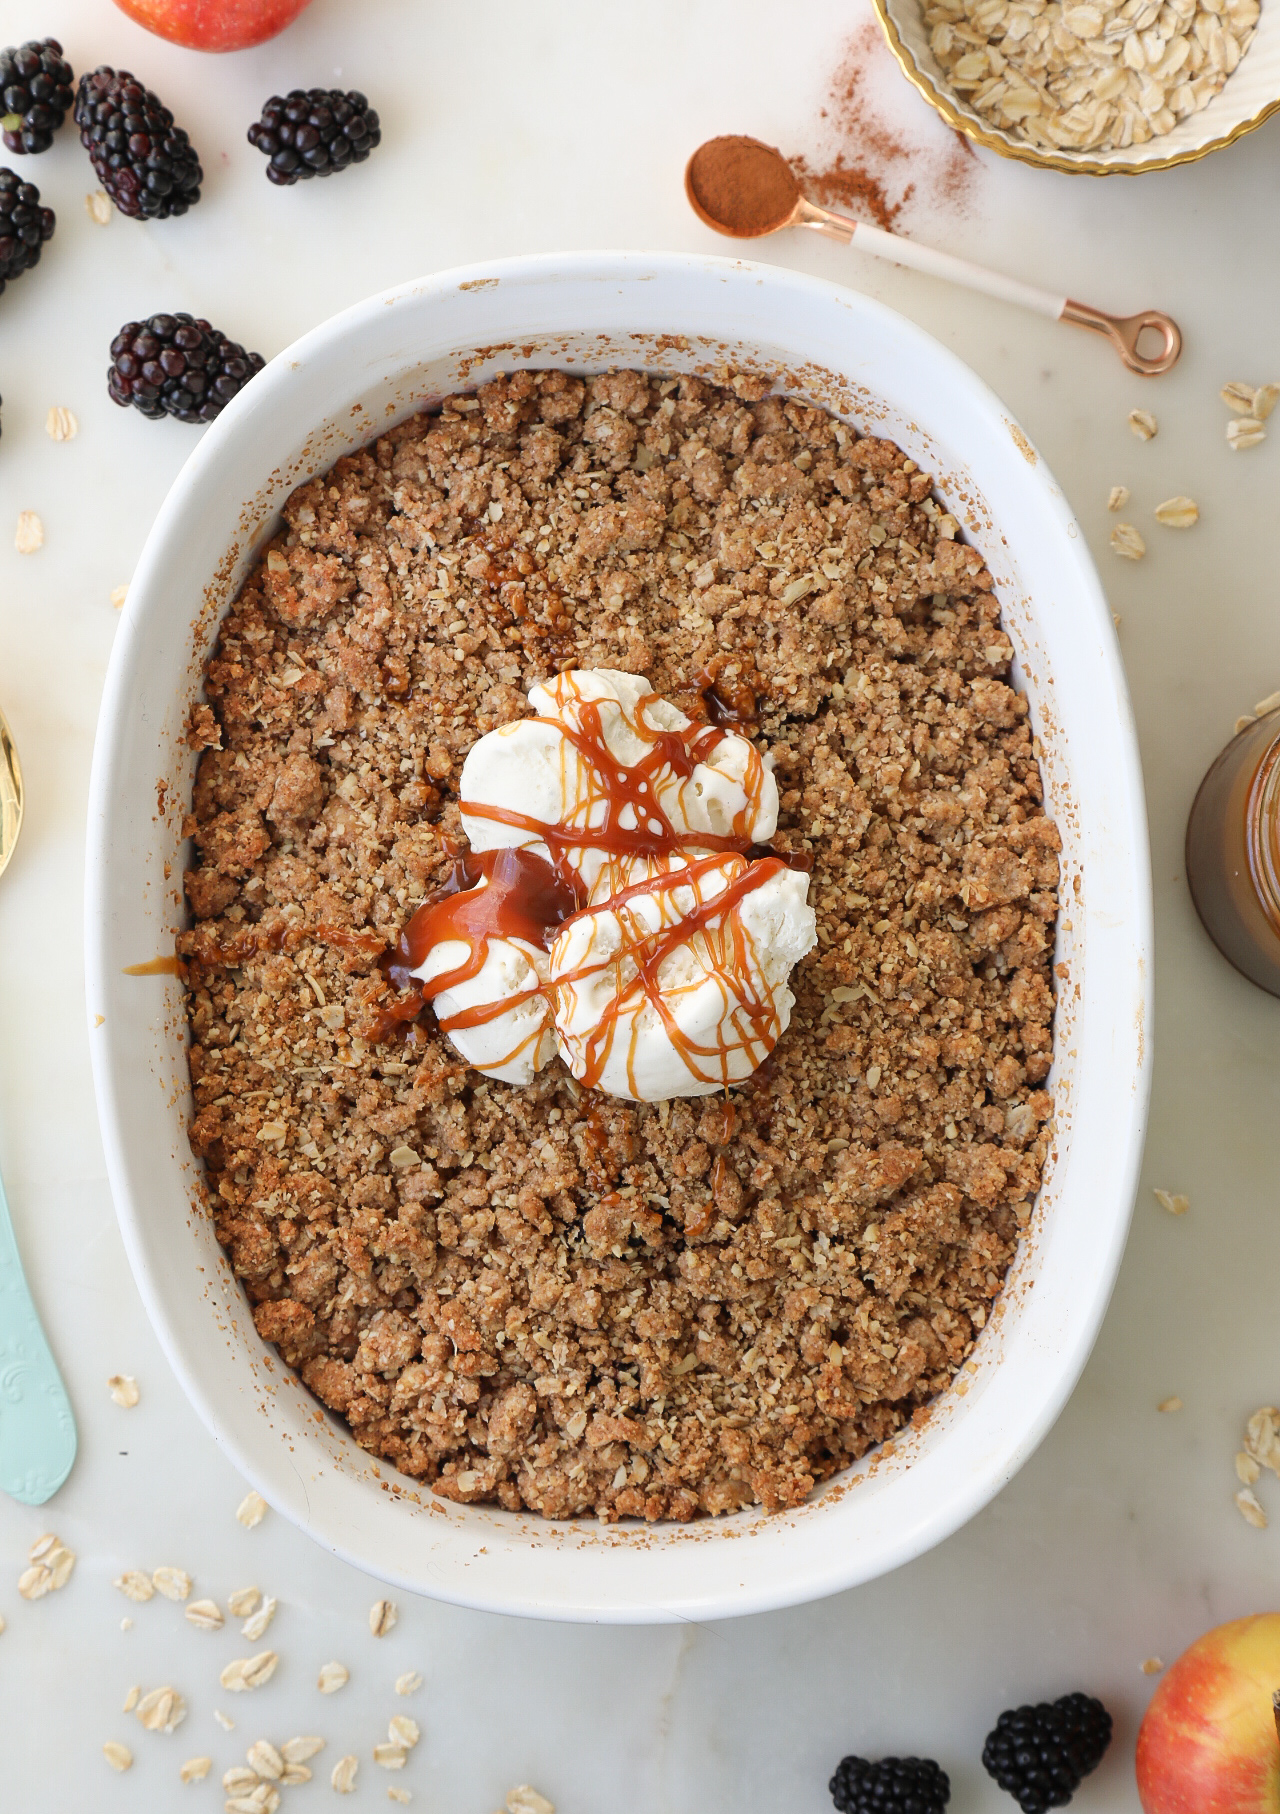 Apple Blackberry Crisp made with Honeycrisp apples and a whole wheat, walnut topping.